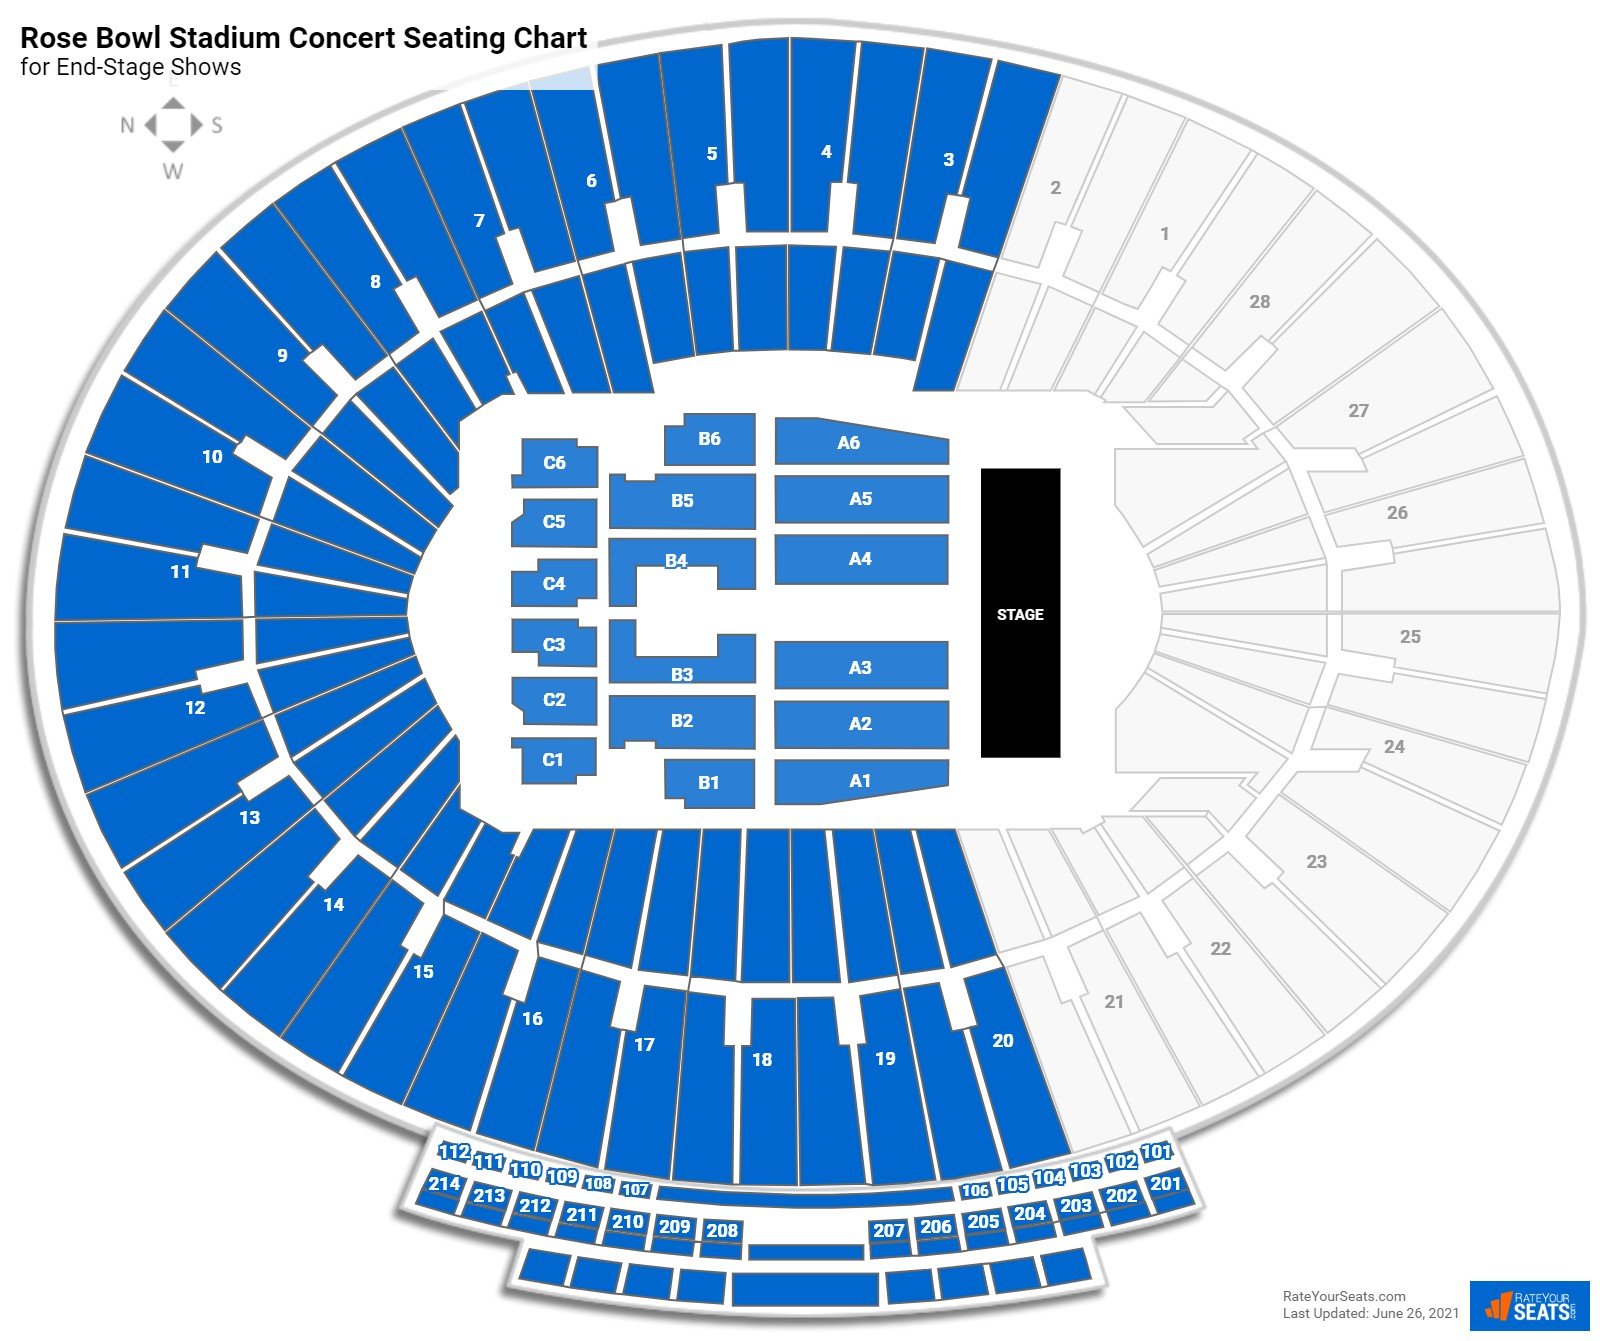 Row Seat Number Rose Bowl Seating Chart